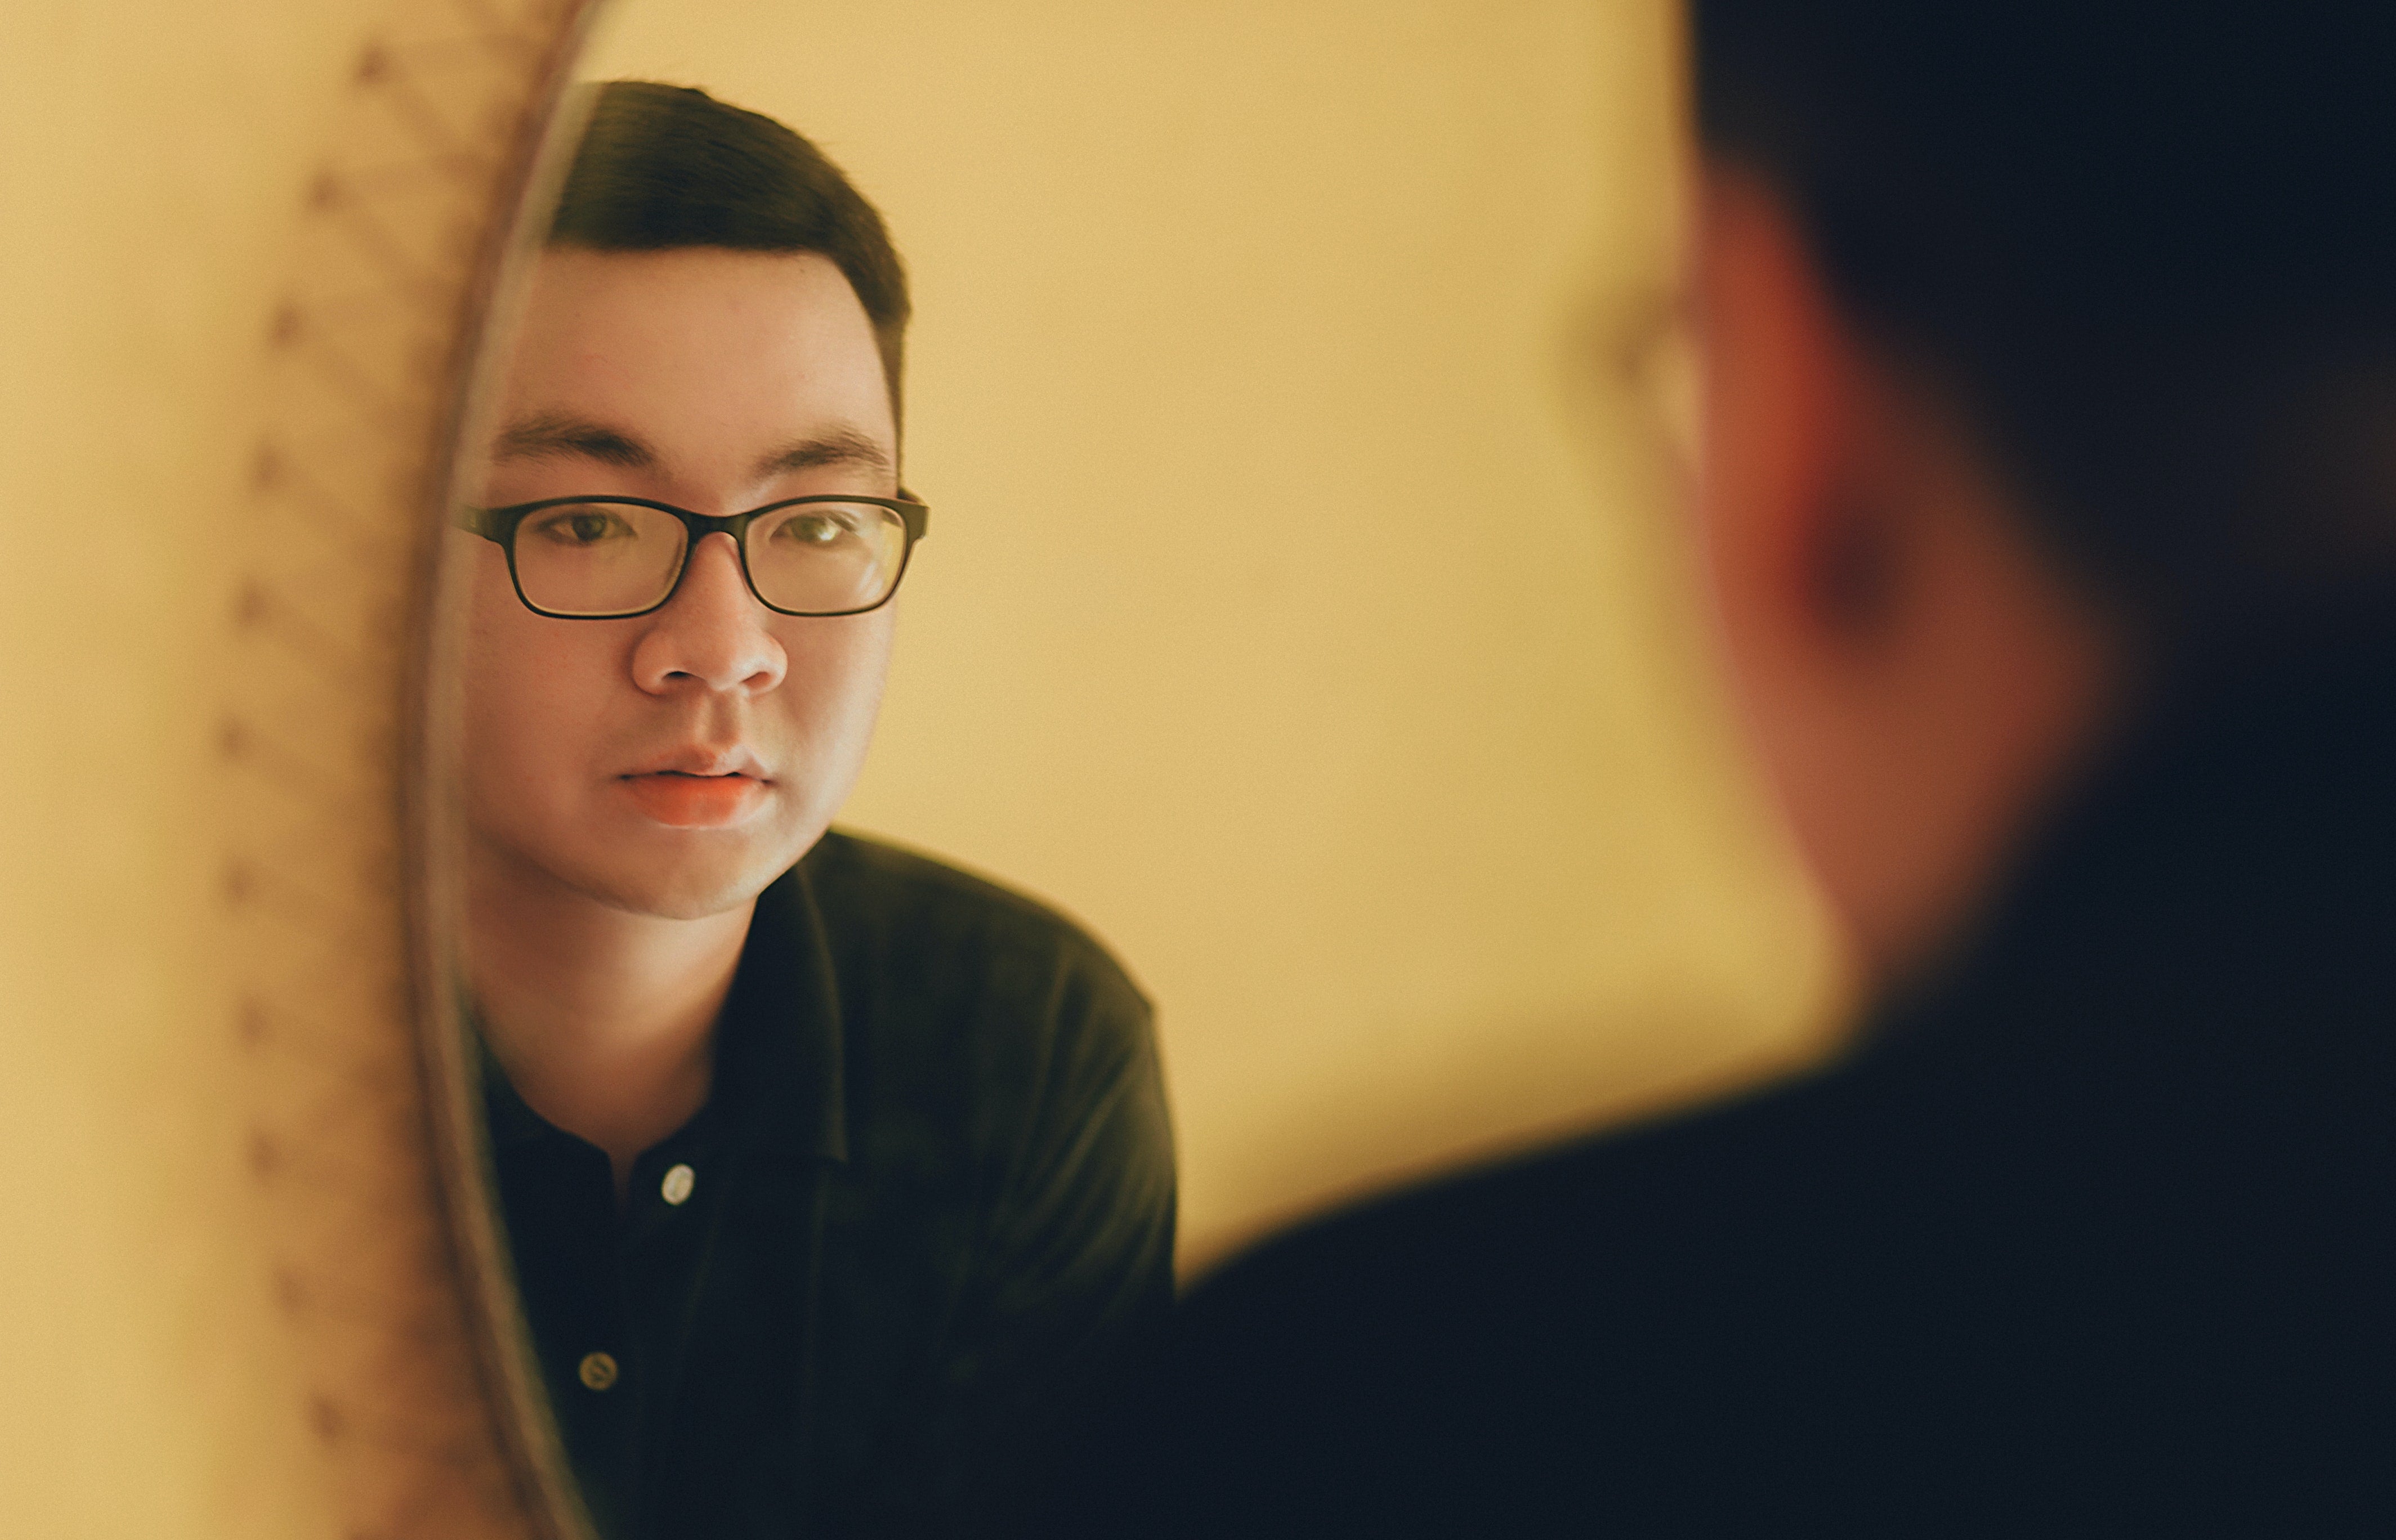 Asian man looking into a mirror   